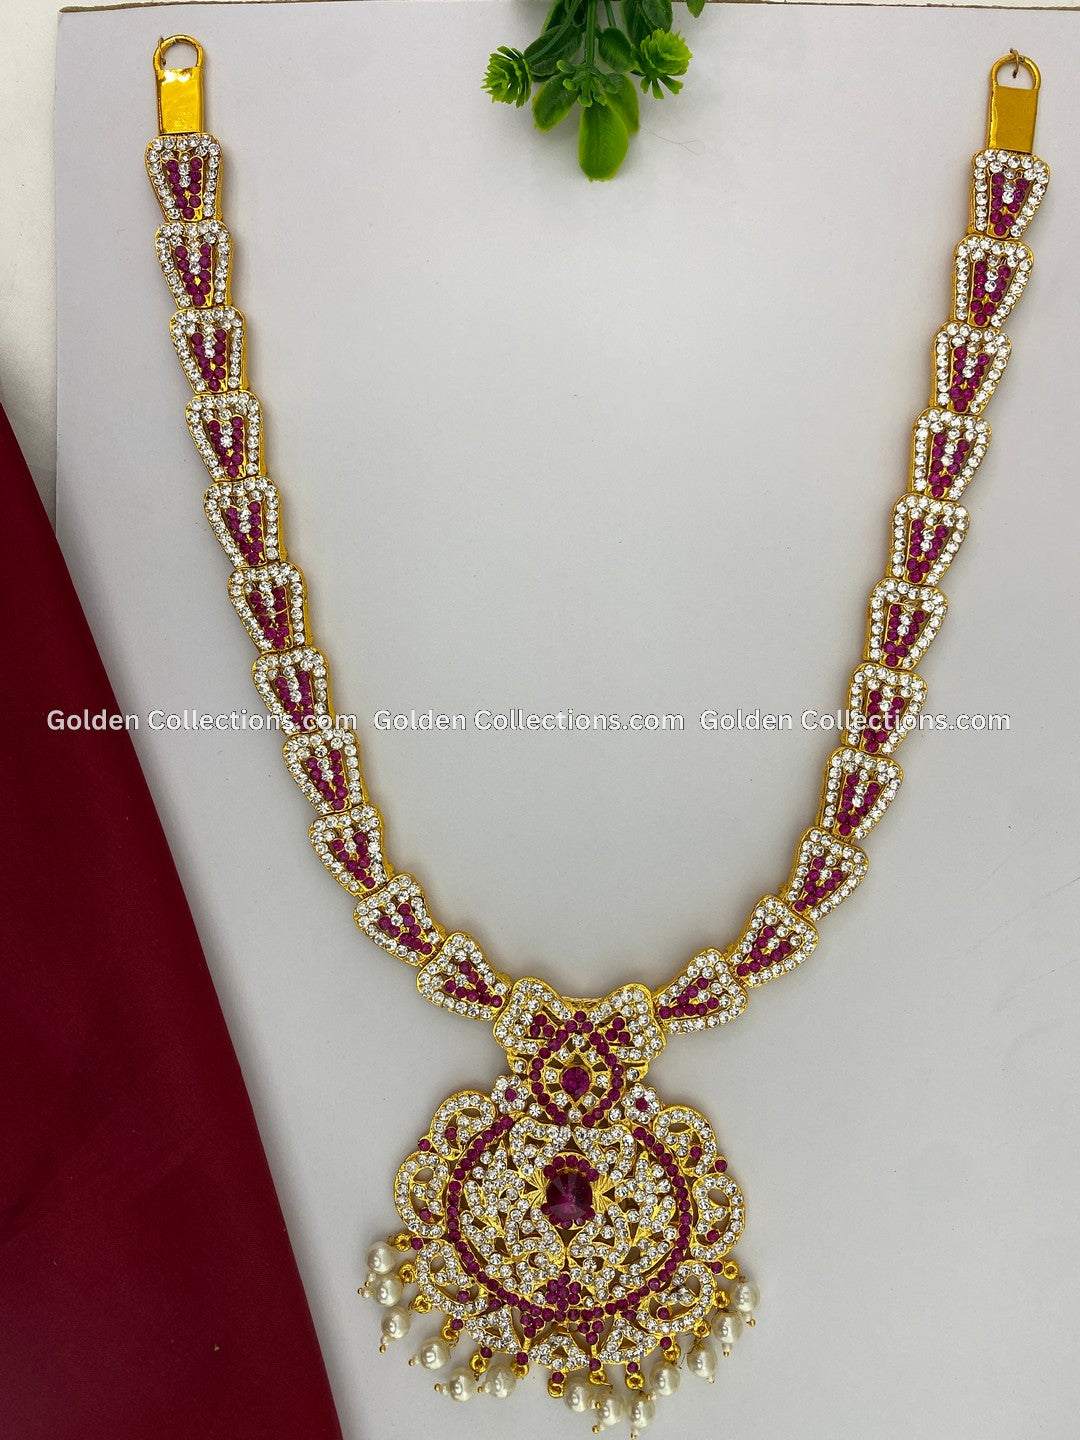 Shop Now Ornate Deity Long Necklace - GoldenCollections